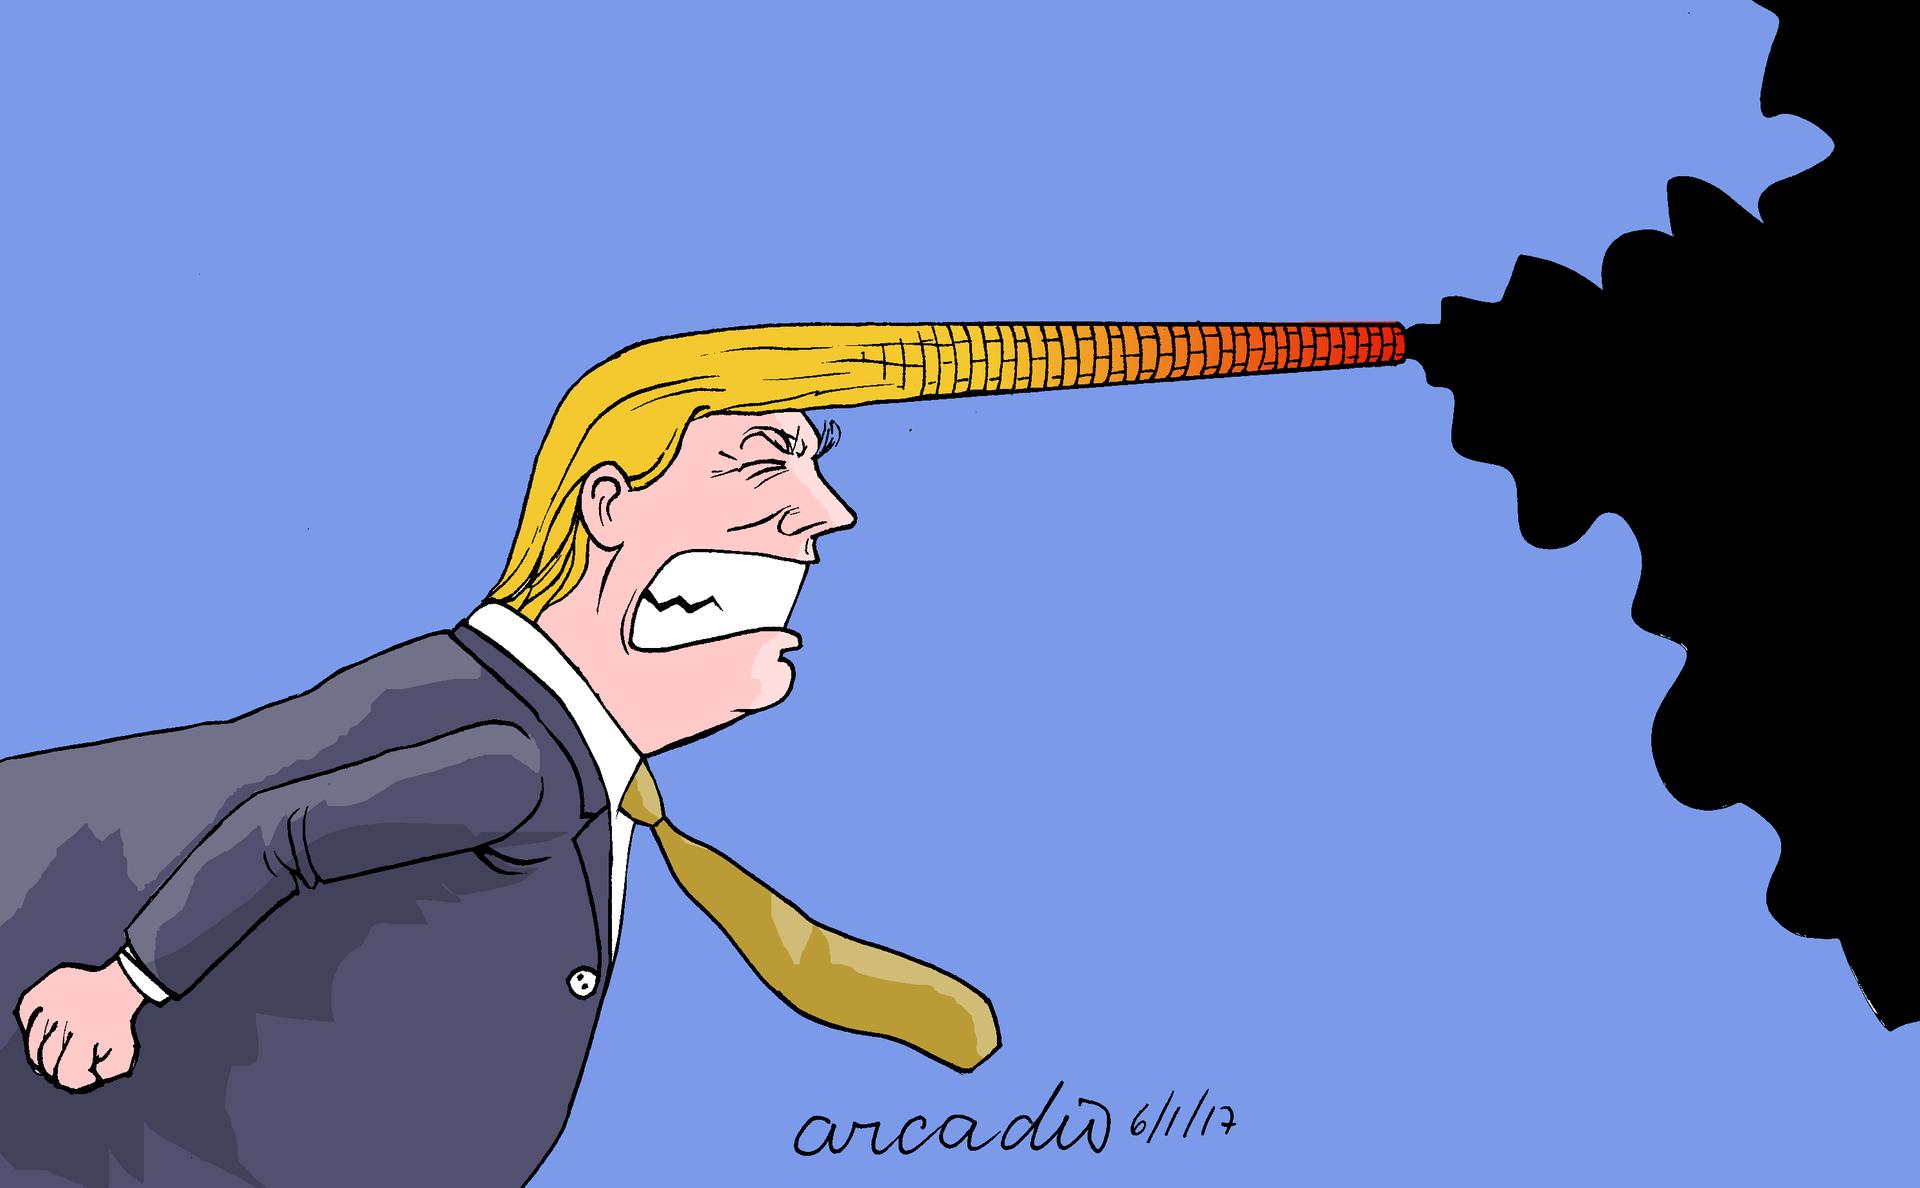 Cartoon of Trump's hair forming smoke stack and blowing out dirty air